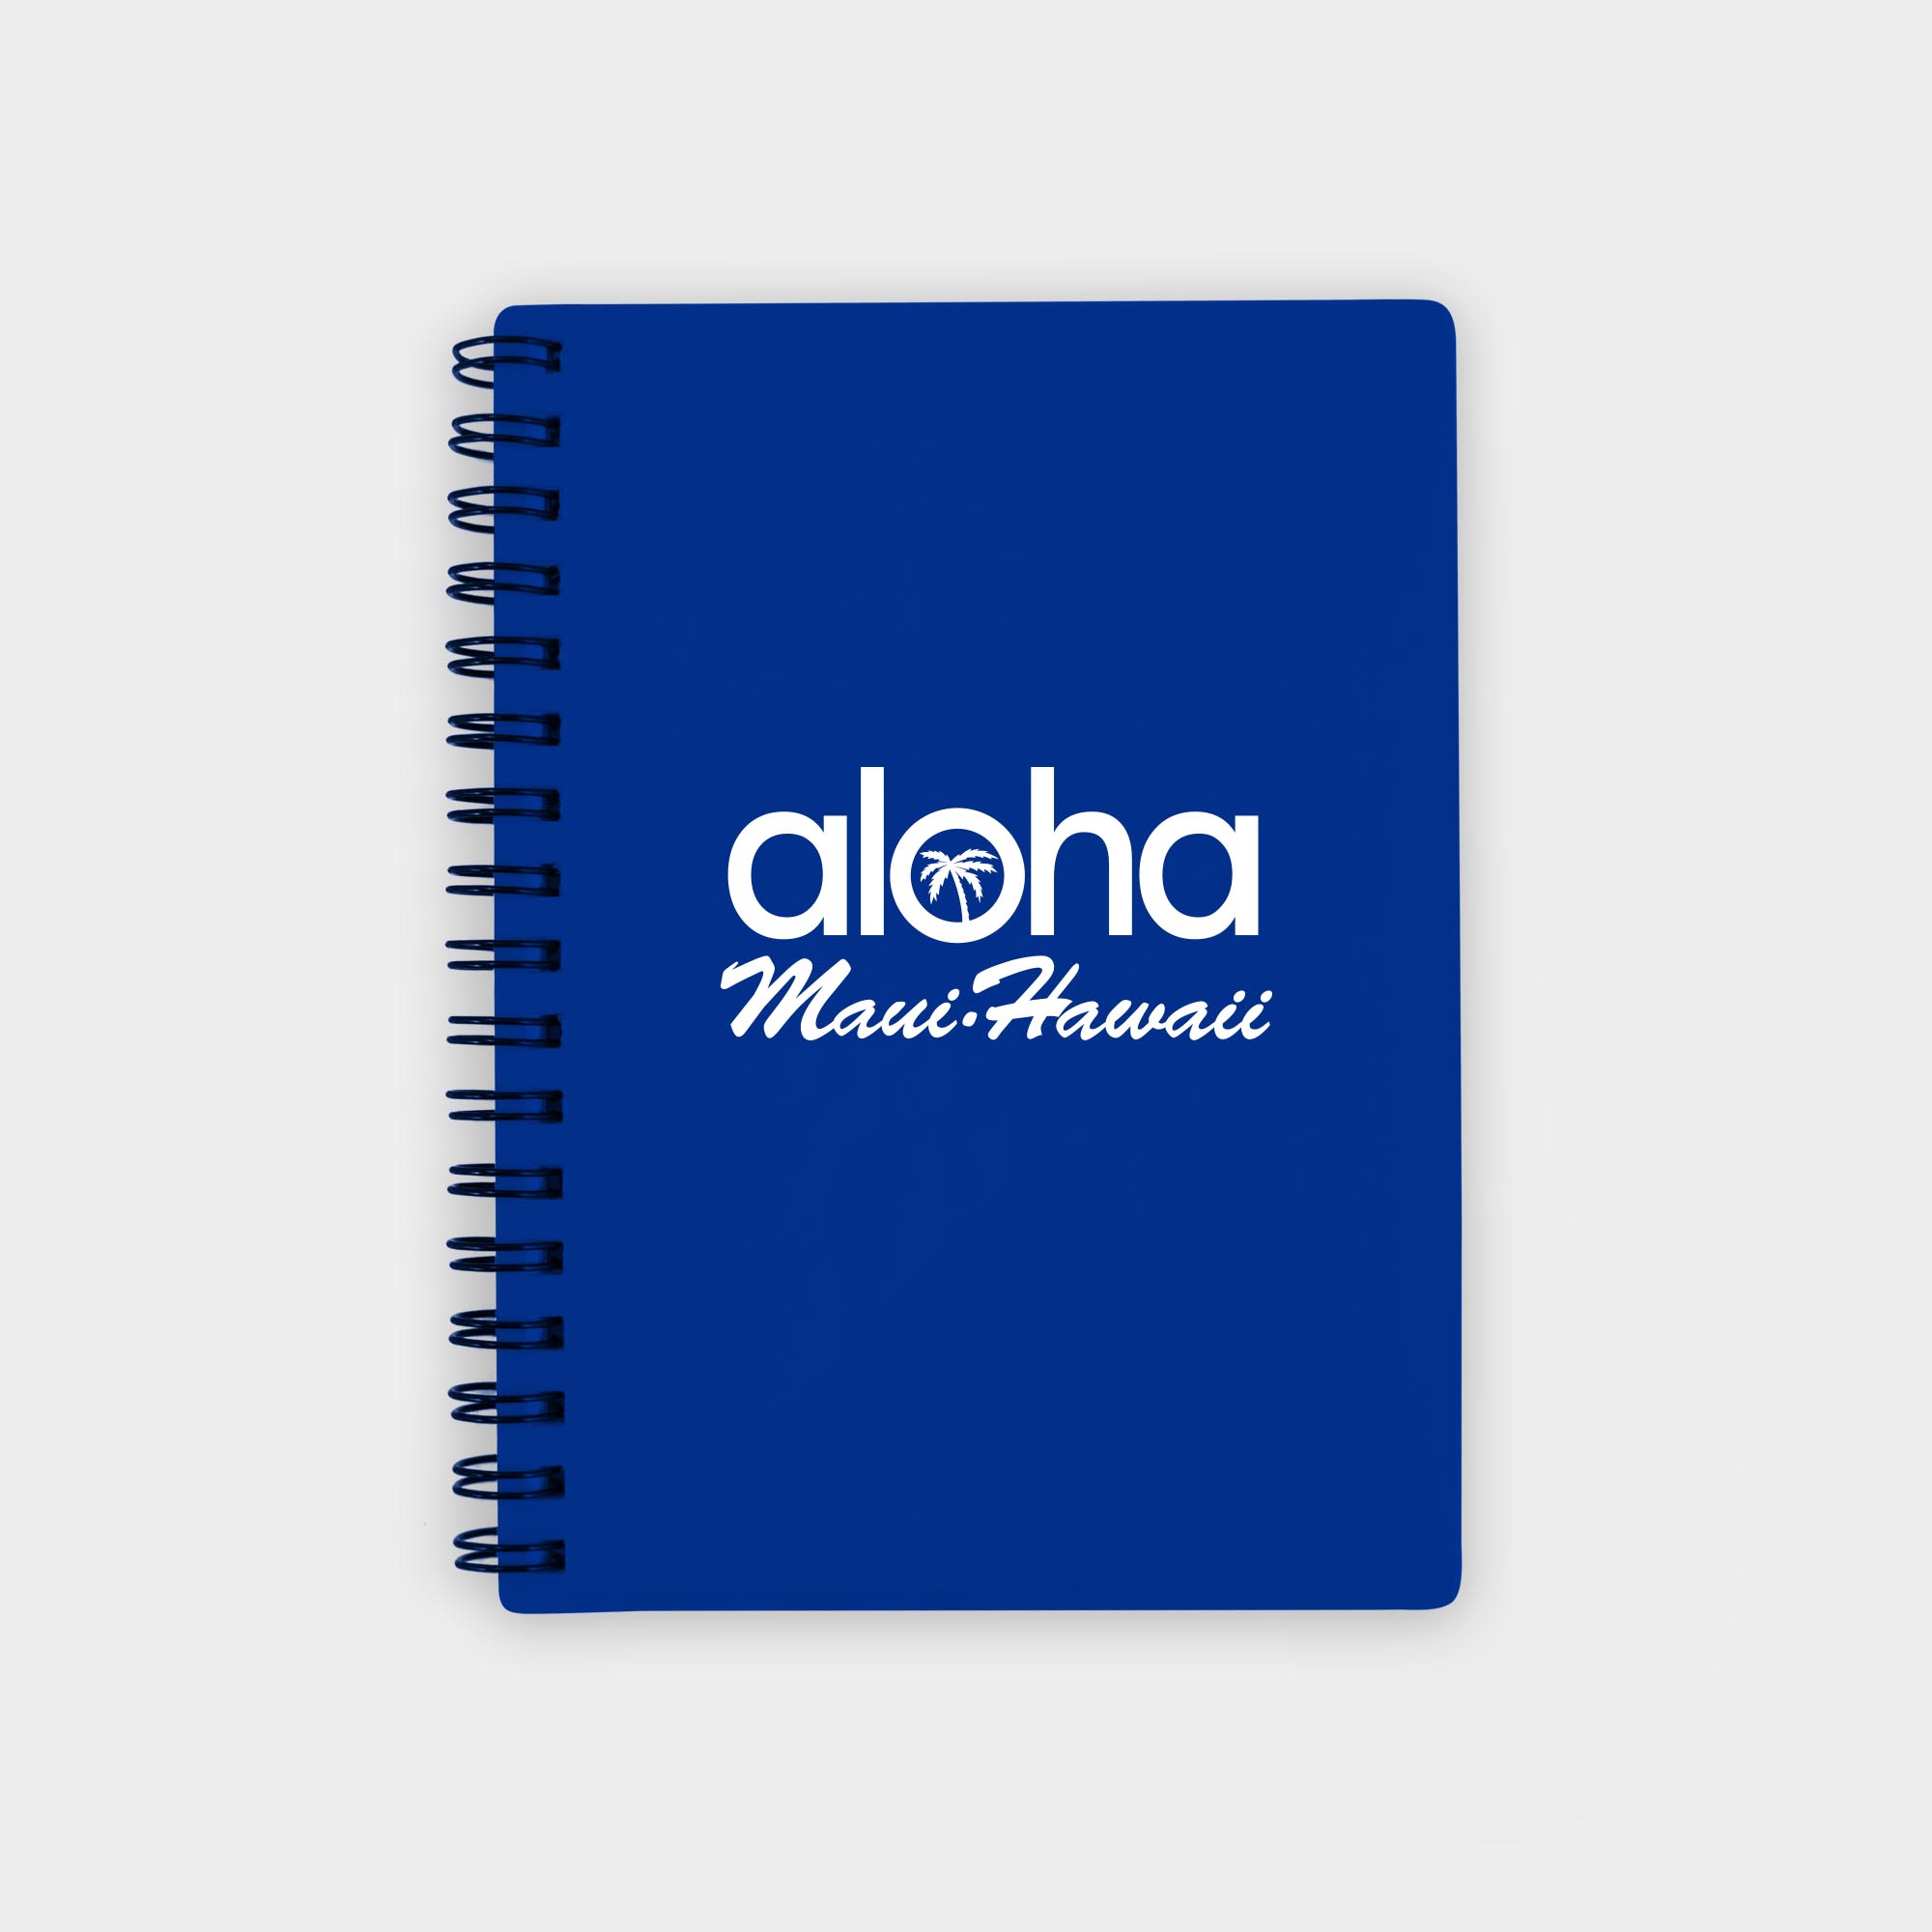 The Green & Good Polypropylene Notebook comes with recycled paper - size A6. The front and back cover is made from recycled polypropylene (500 microns), the sheets are 80gsm. Comes wirebound with 50 sheets as standard. Please contact us if you require a bespoke number of sheets. Royal Blue